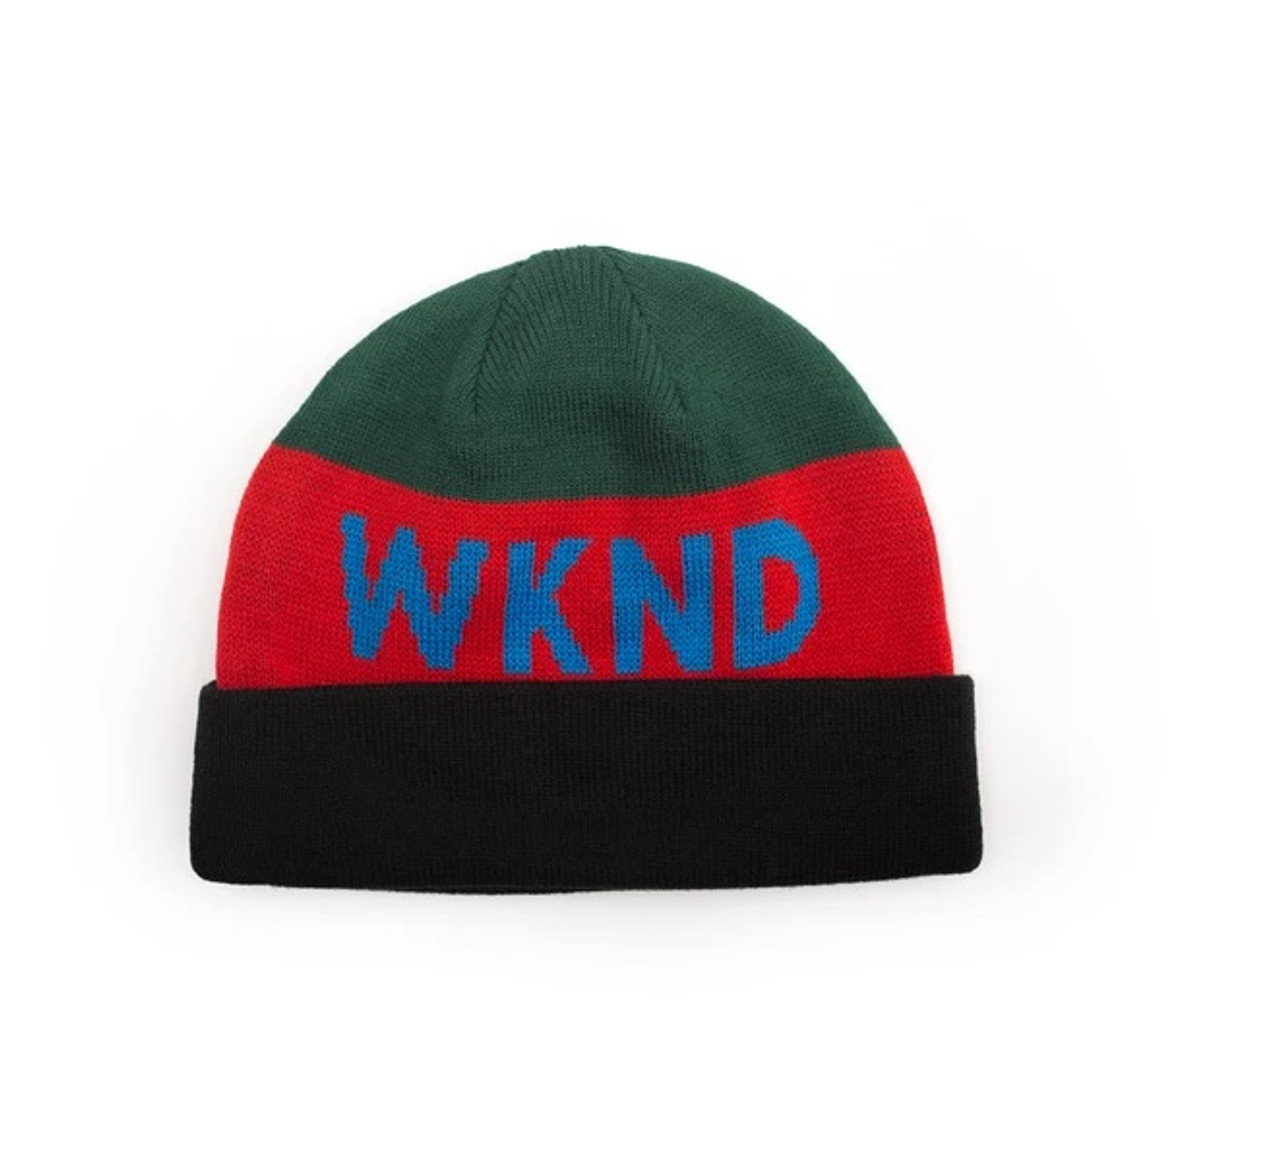 WKND Collision Cap Green Red OneSize